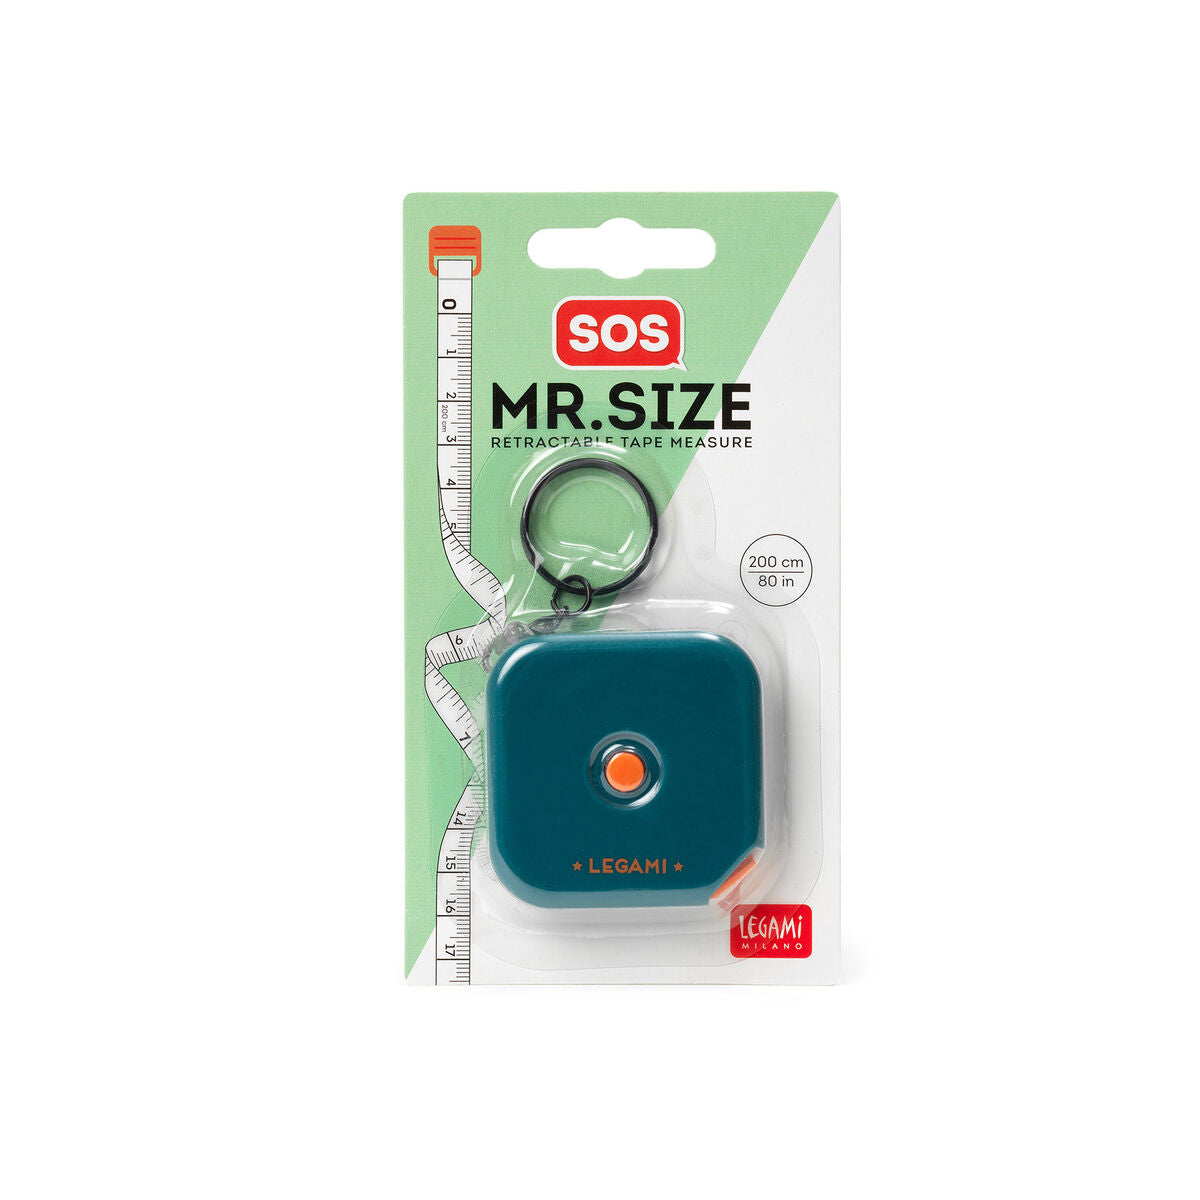 Fab Gifts | Legami Sos Mr. Size - Retractable Tape Measure by Weirs of Baggot Street